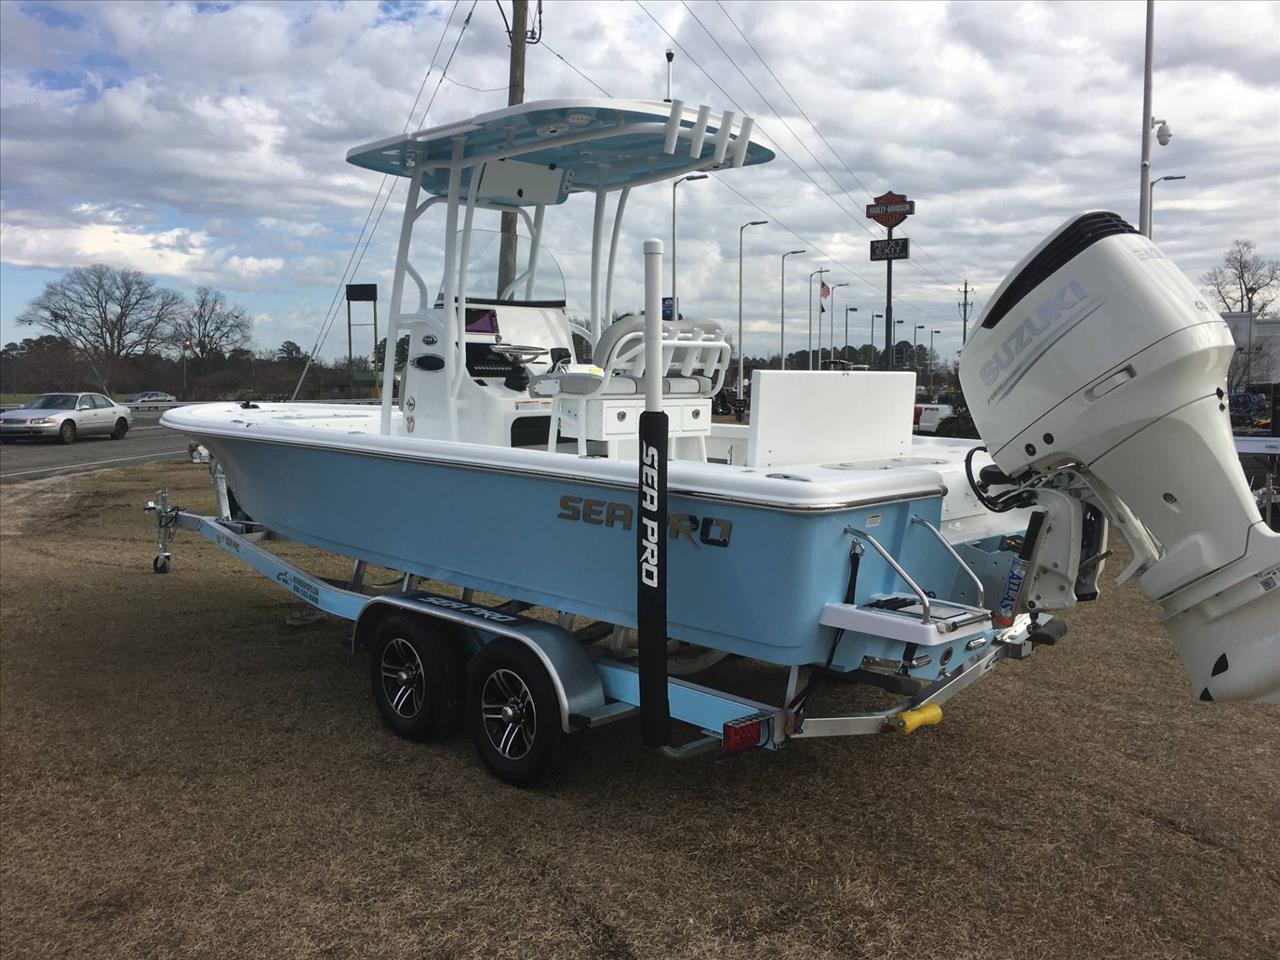 Sea Pro 248 -- 2017 for sale for $68,450 - Boats-from-USA.com